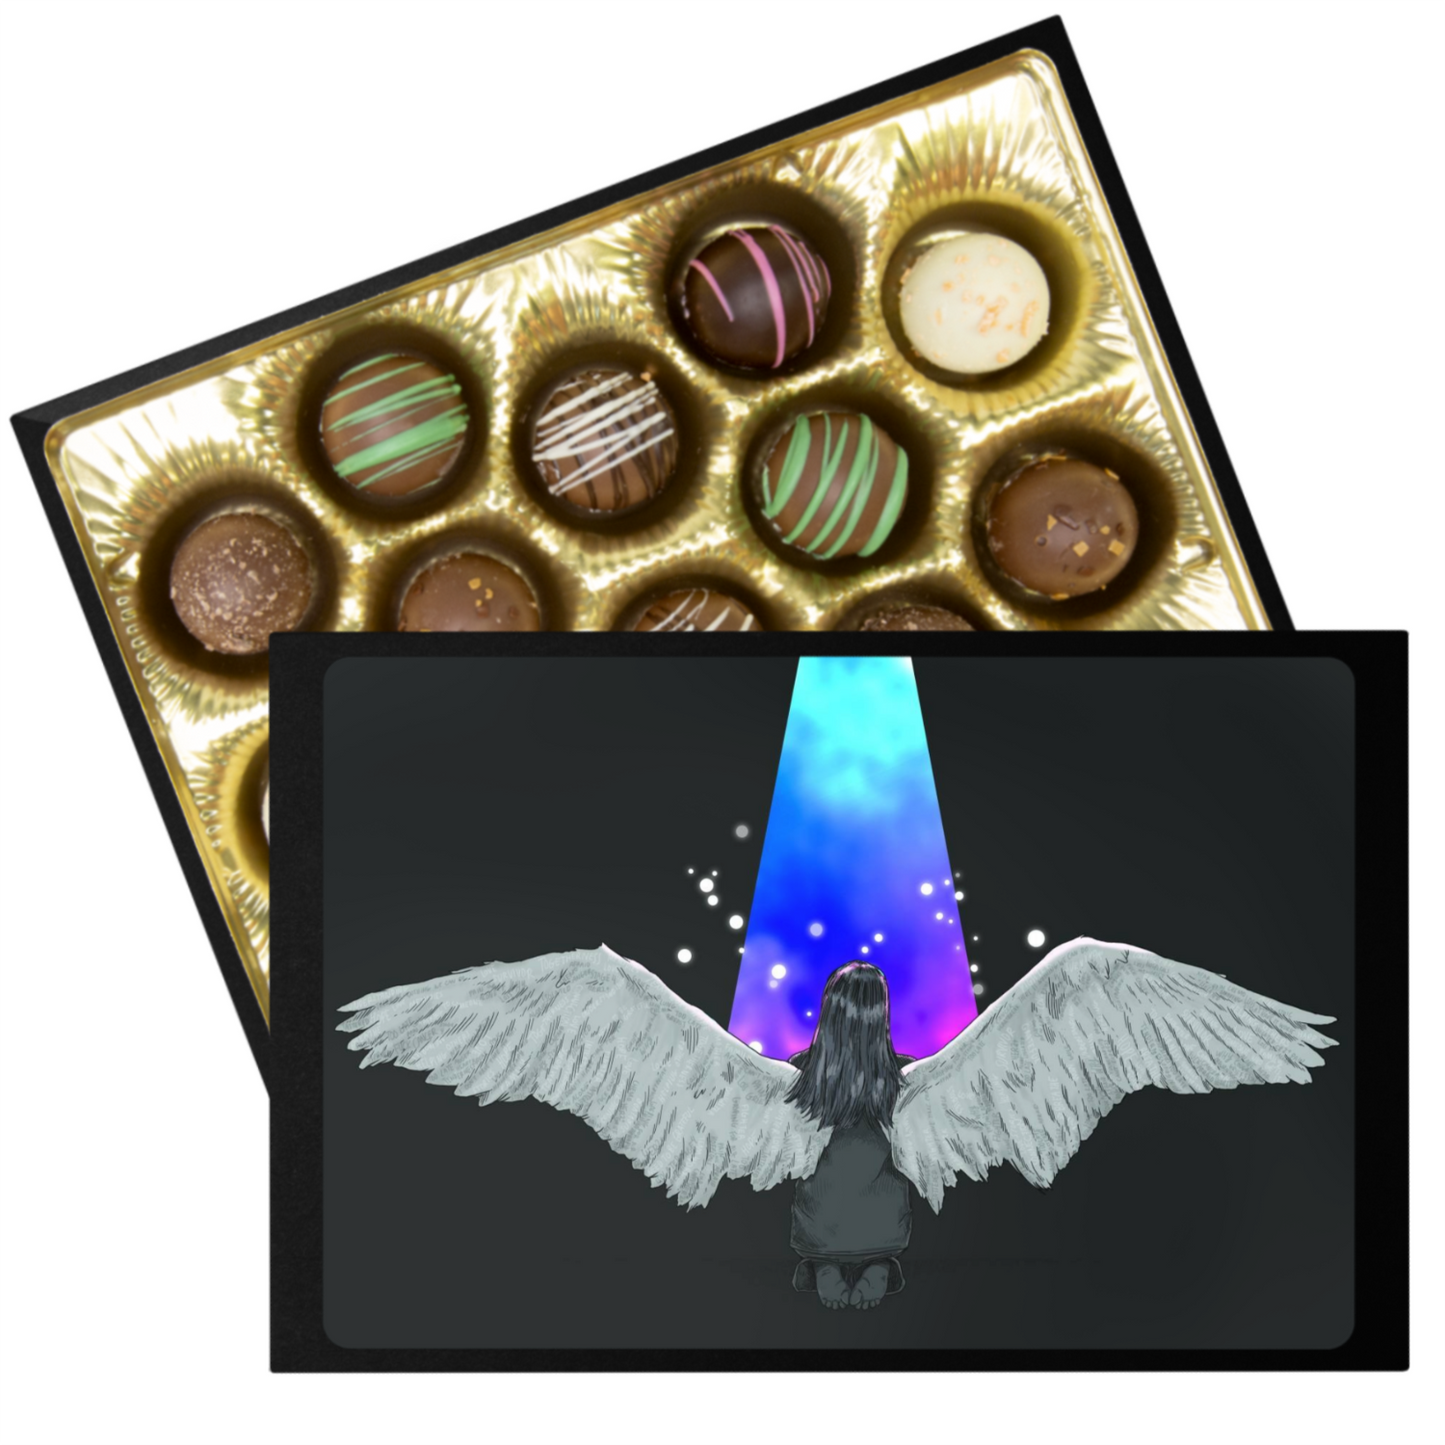 Handmade Chocolate Truffles with "Find Your Light" Box